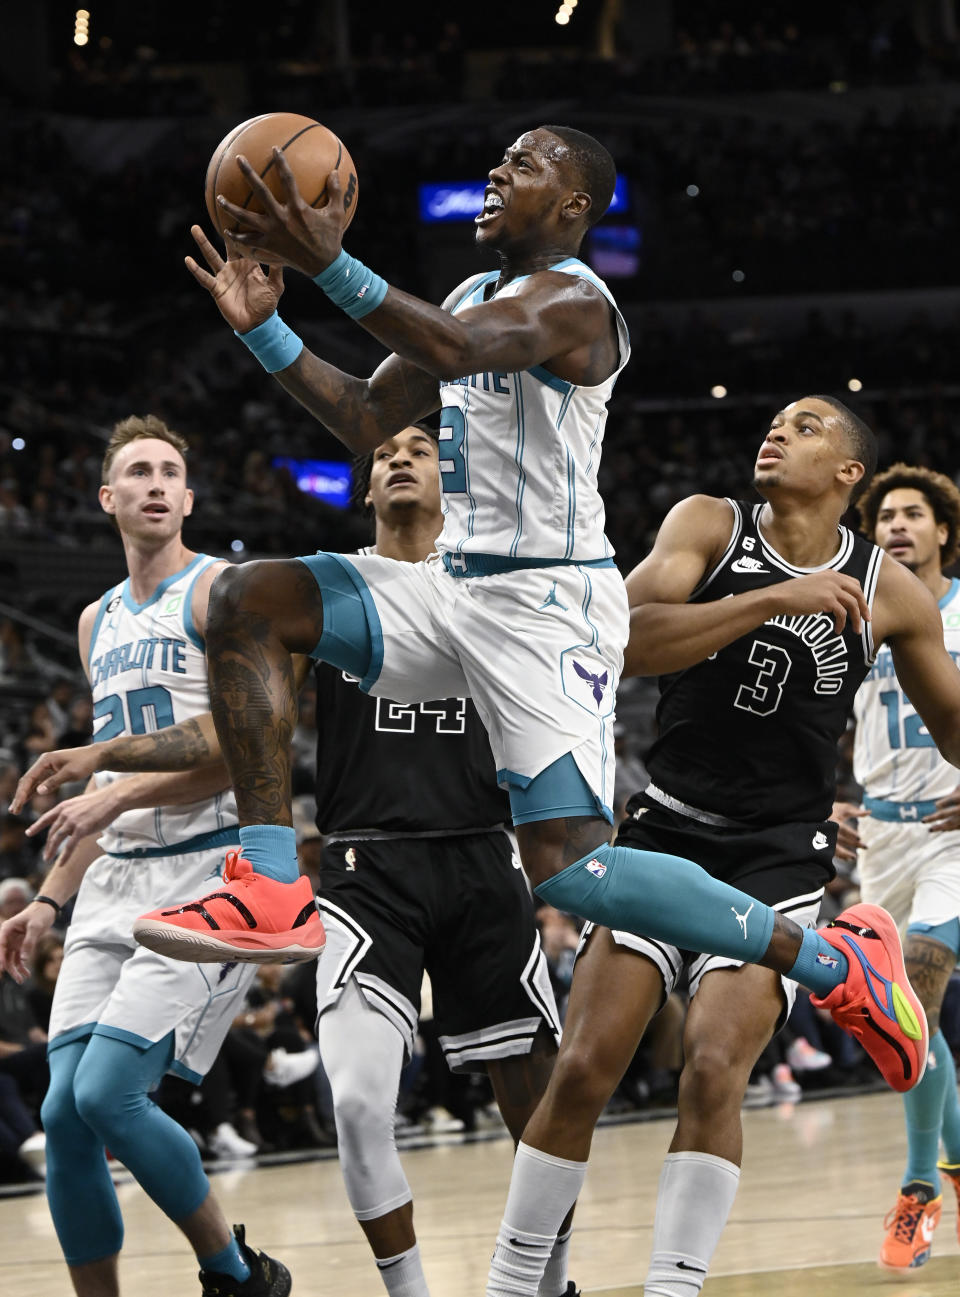 Charlotte Hornets' Terry Rozier, center, drives to the basket past San Antonio Spurs' Keldon Johnson, right, as Spurs' Devin Vassell and Hornets' Gordon Hayward, left, look on during the first half of an NBA basketball game, Wednesday, Oct. 19, 2022, in San Antonio. (AP Photo/Darren Abate)